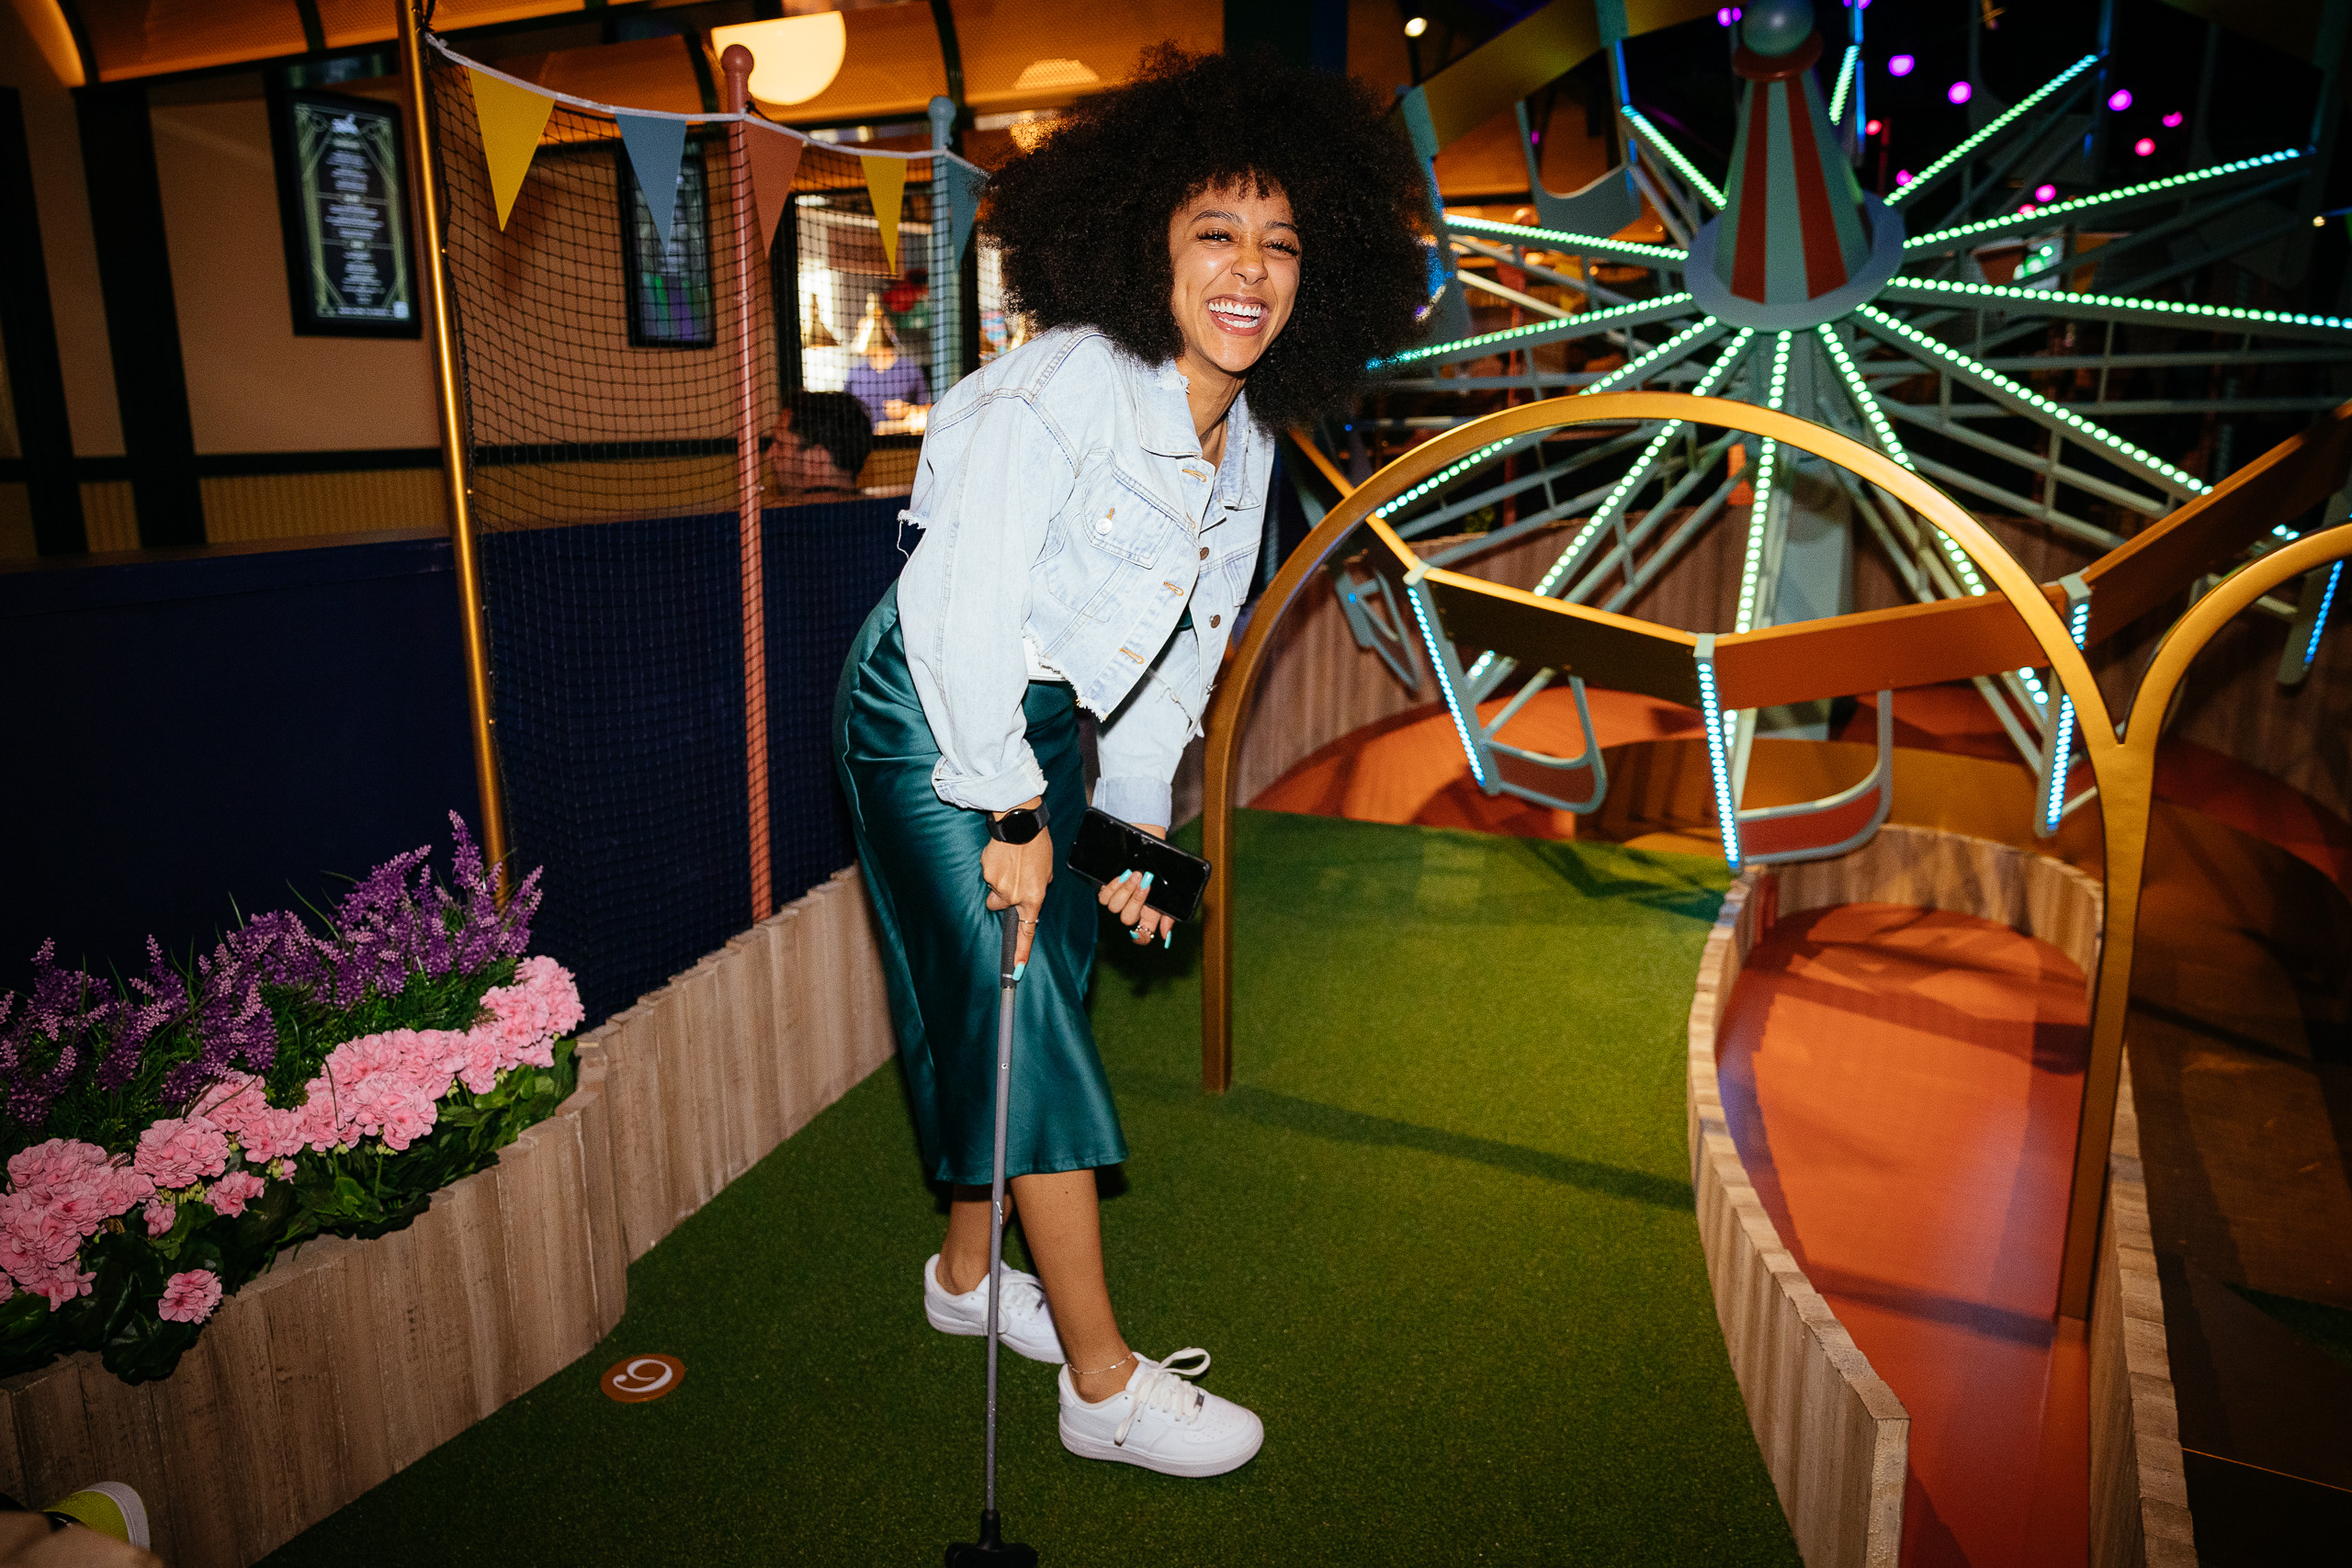 Woman laughs on crazy golf course